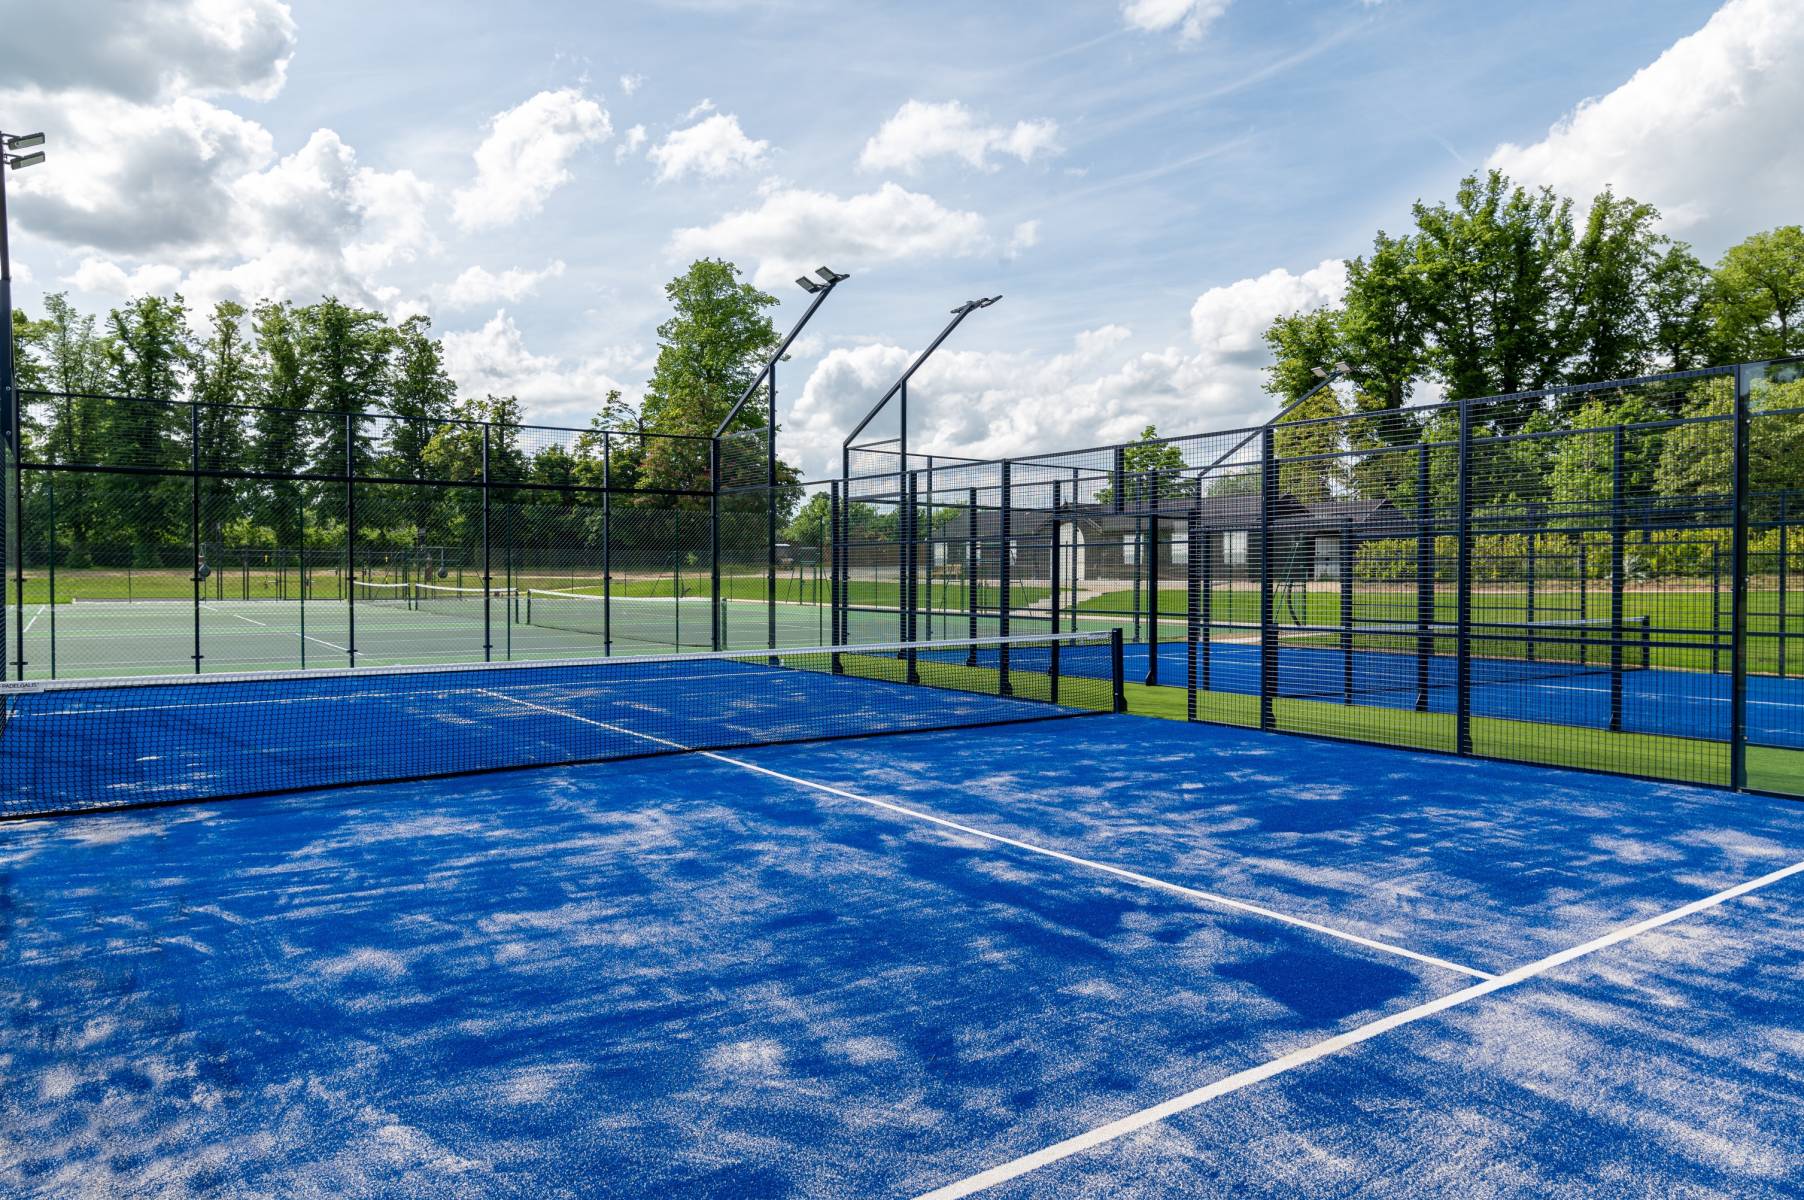 Padel Courts